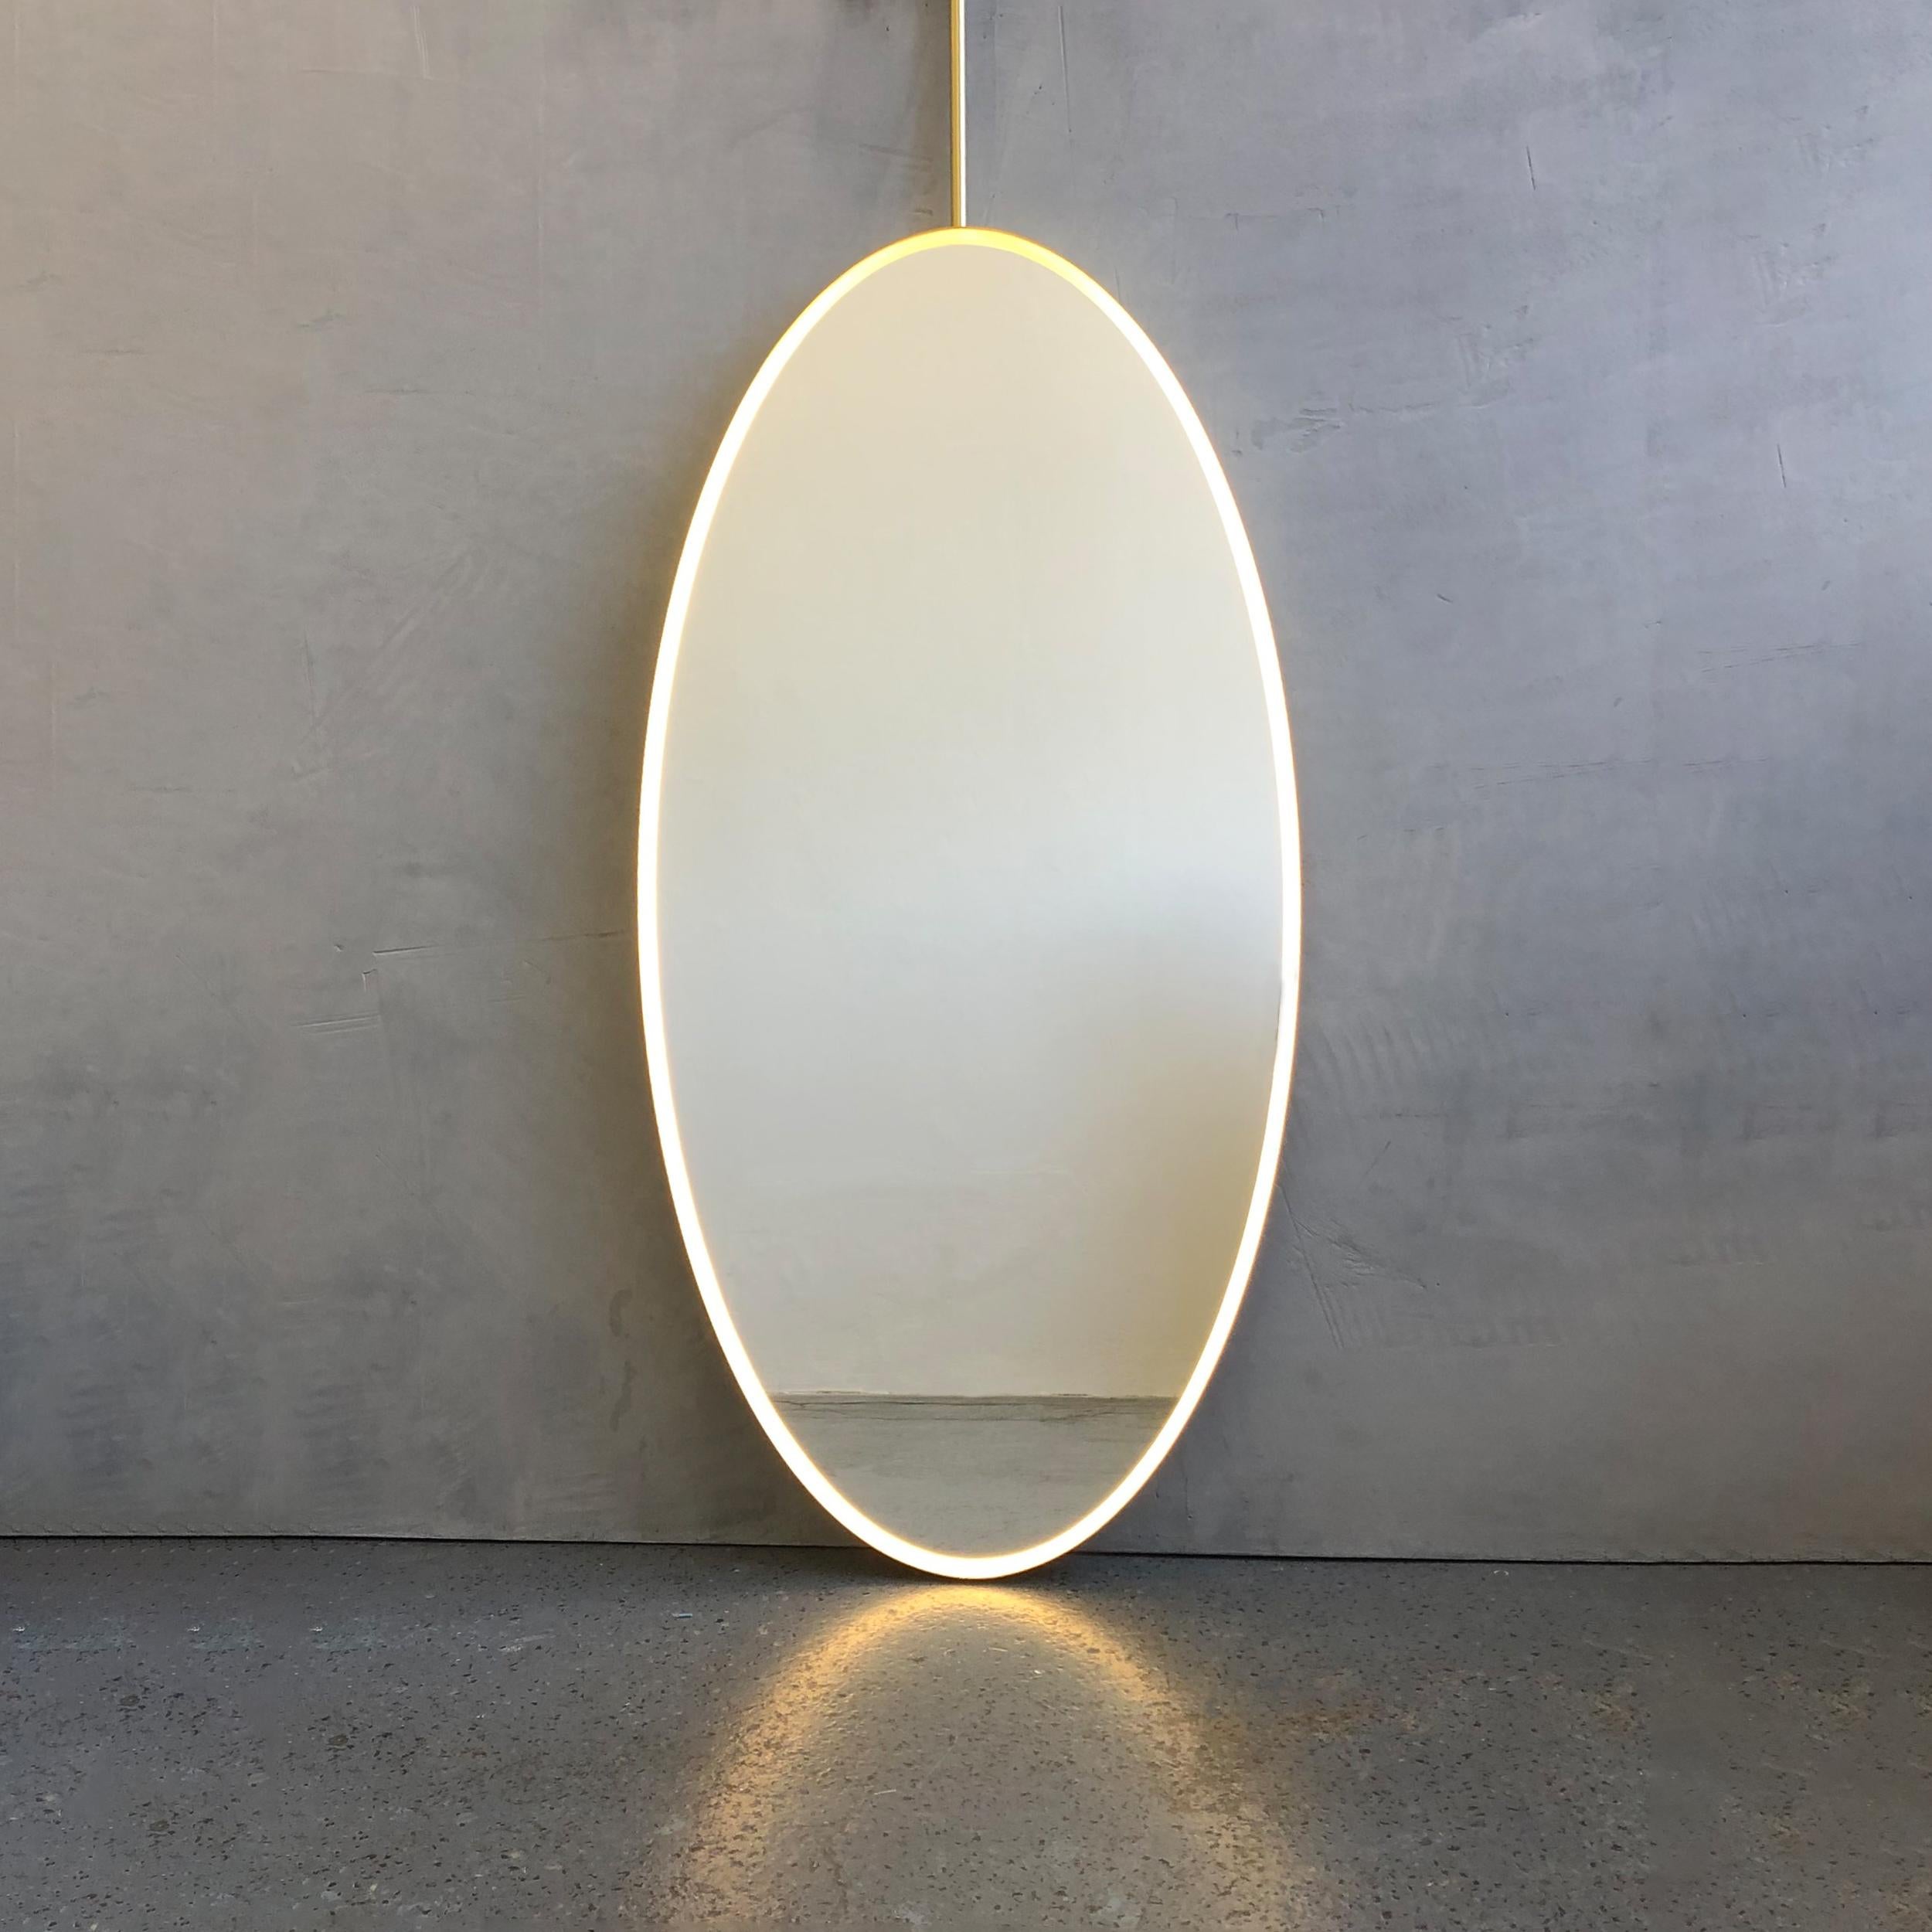 Superb ceiling suspended Ovalis™ oval shaped mirror with an elegant brushed brass frame and front illumination on one side.

Mirror dimensions: 100cm (39.4